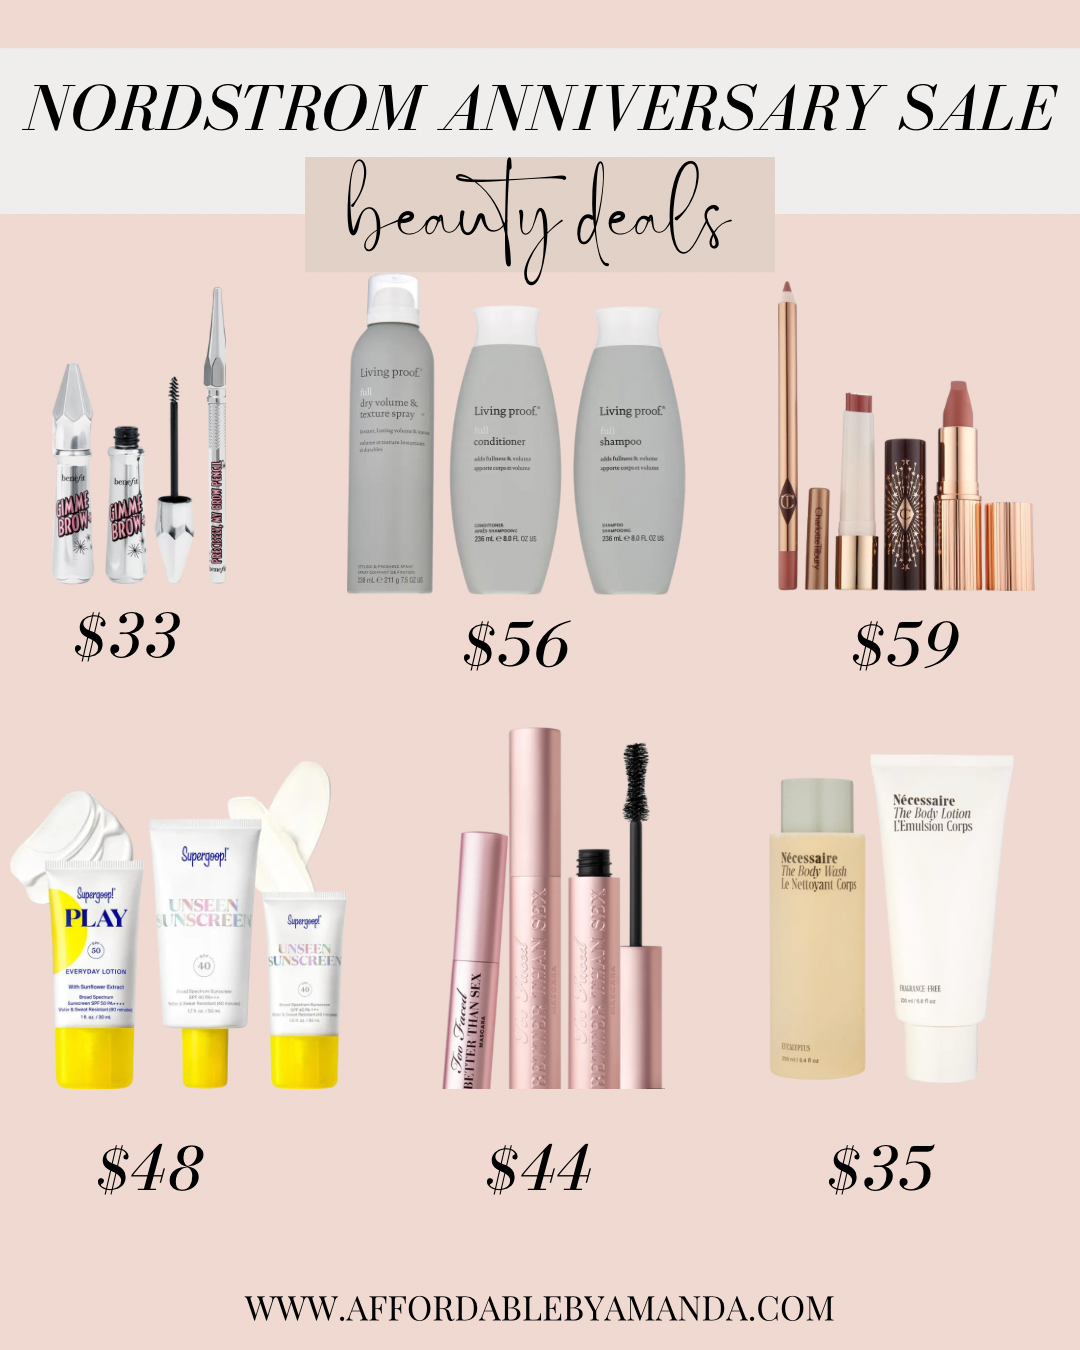 Best Nordstrom Anniversary Beauty Sales 2022 - Affordable by Amanda